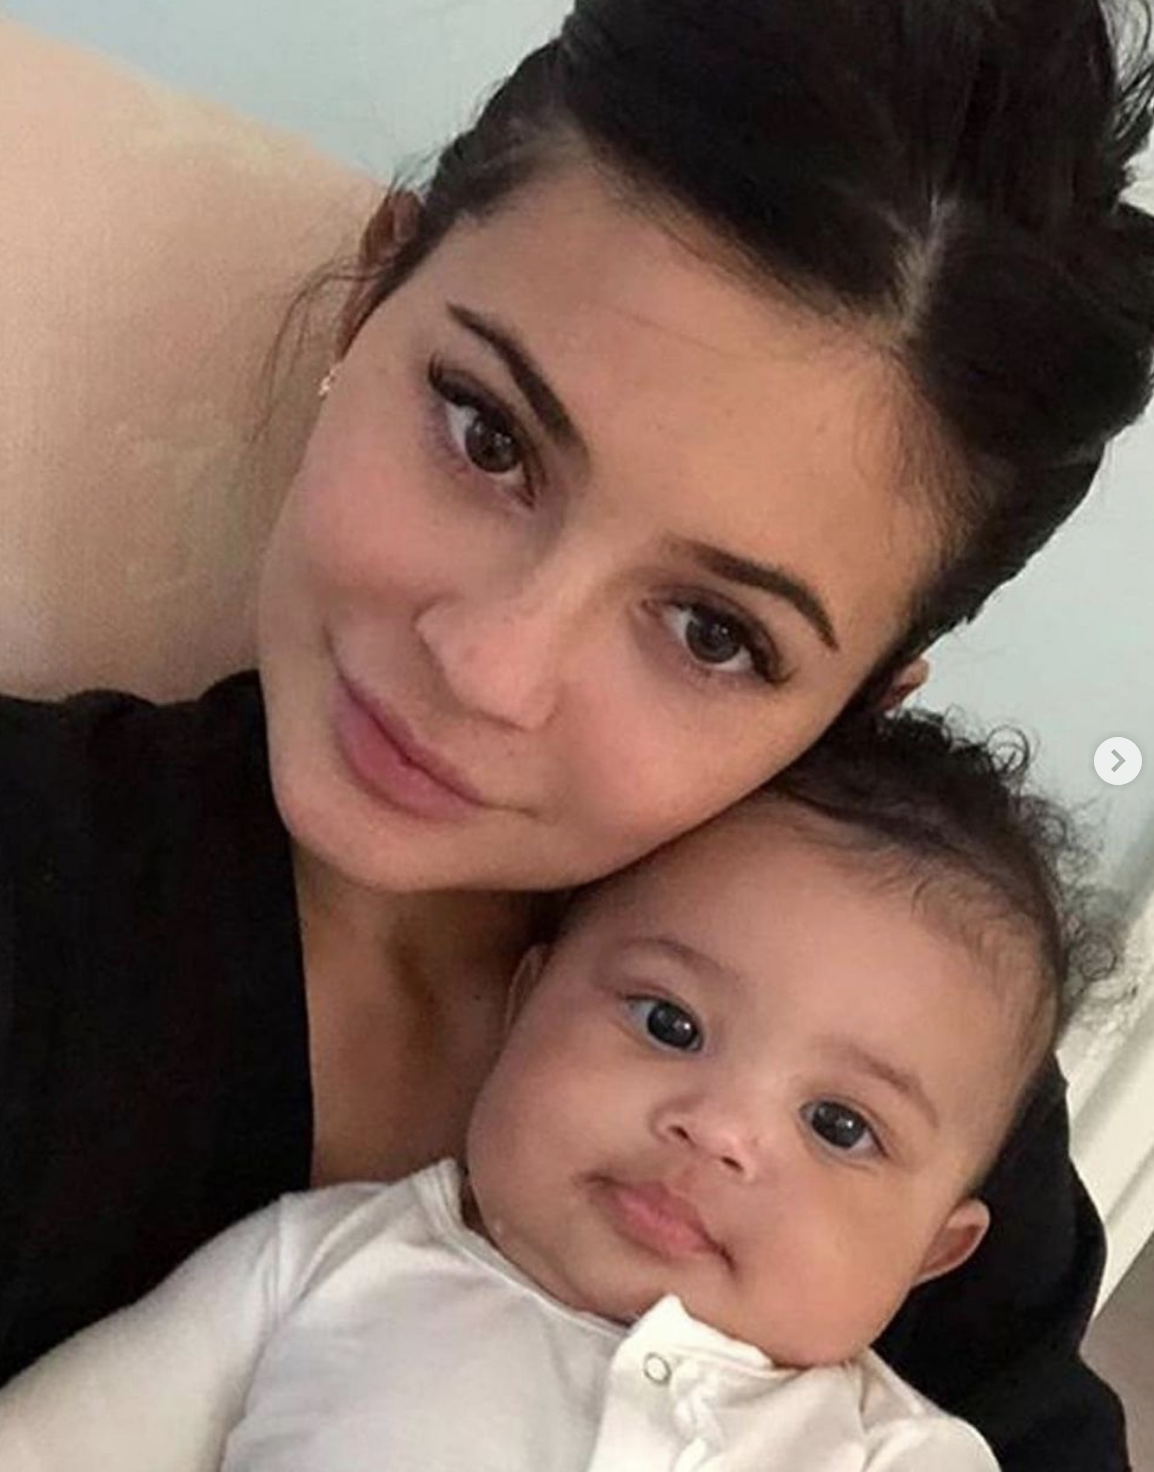 Close-up of Kylie and Stormi